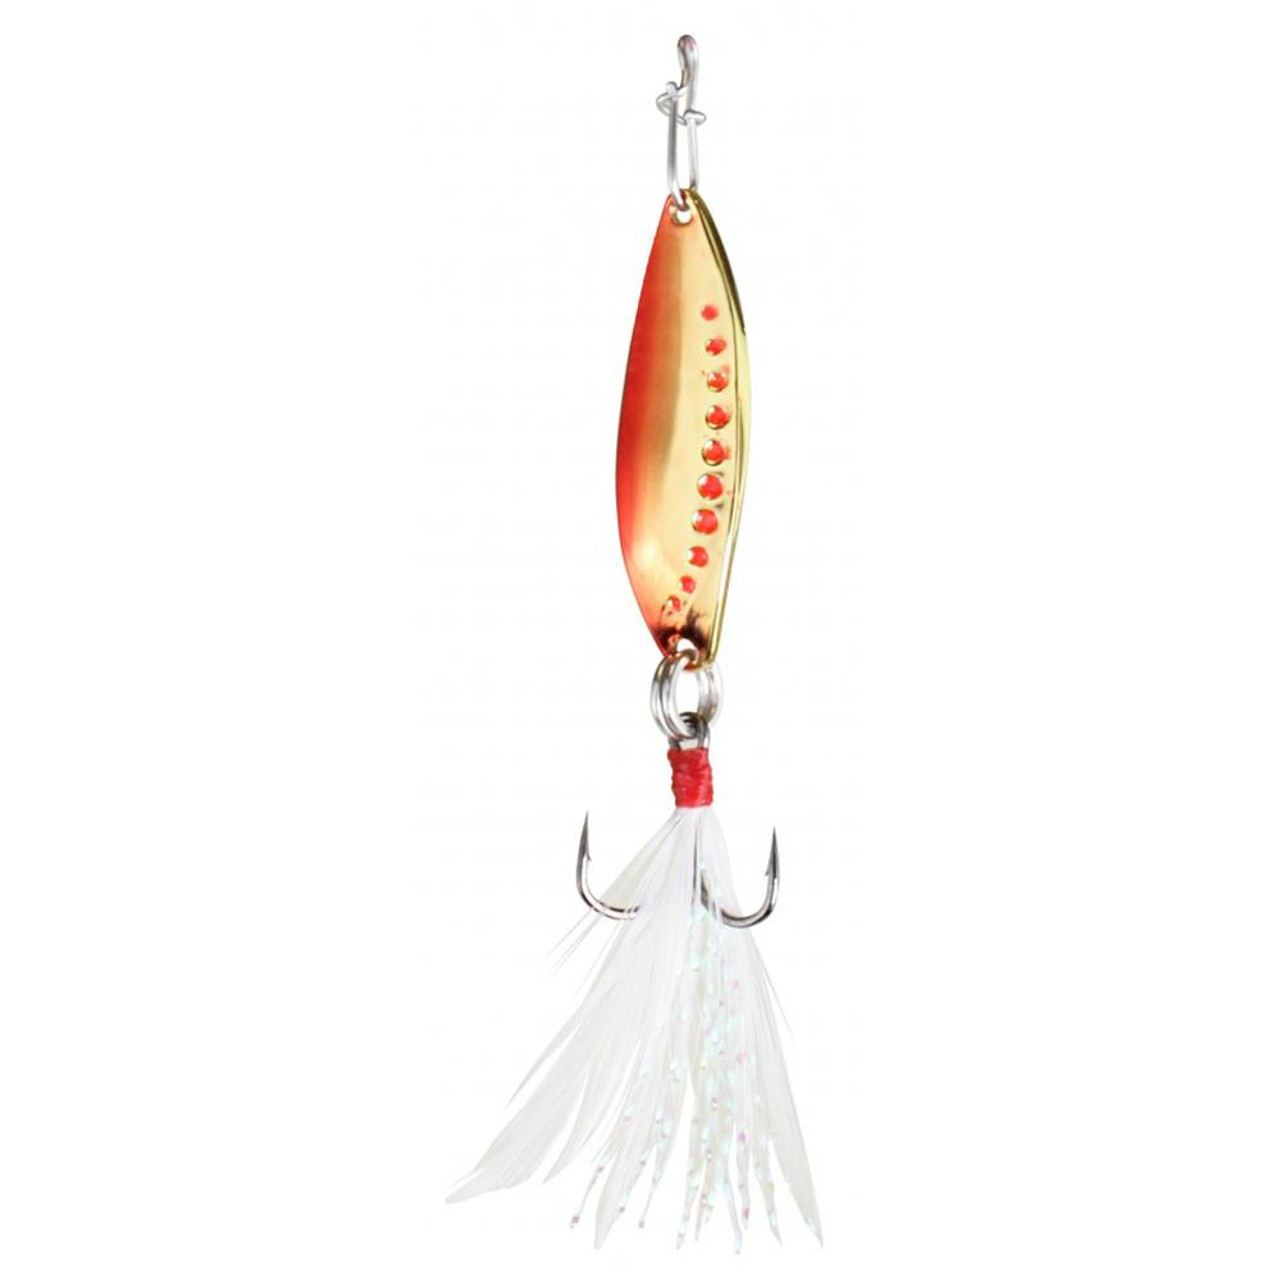 Clam Panfish Leech Flutter Spoon Red Gold; 1/32 oz.